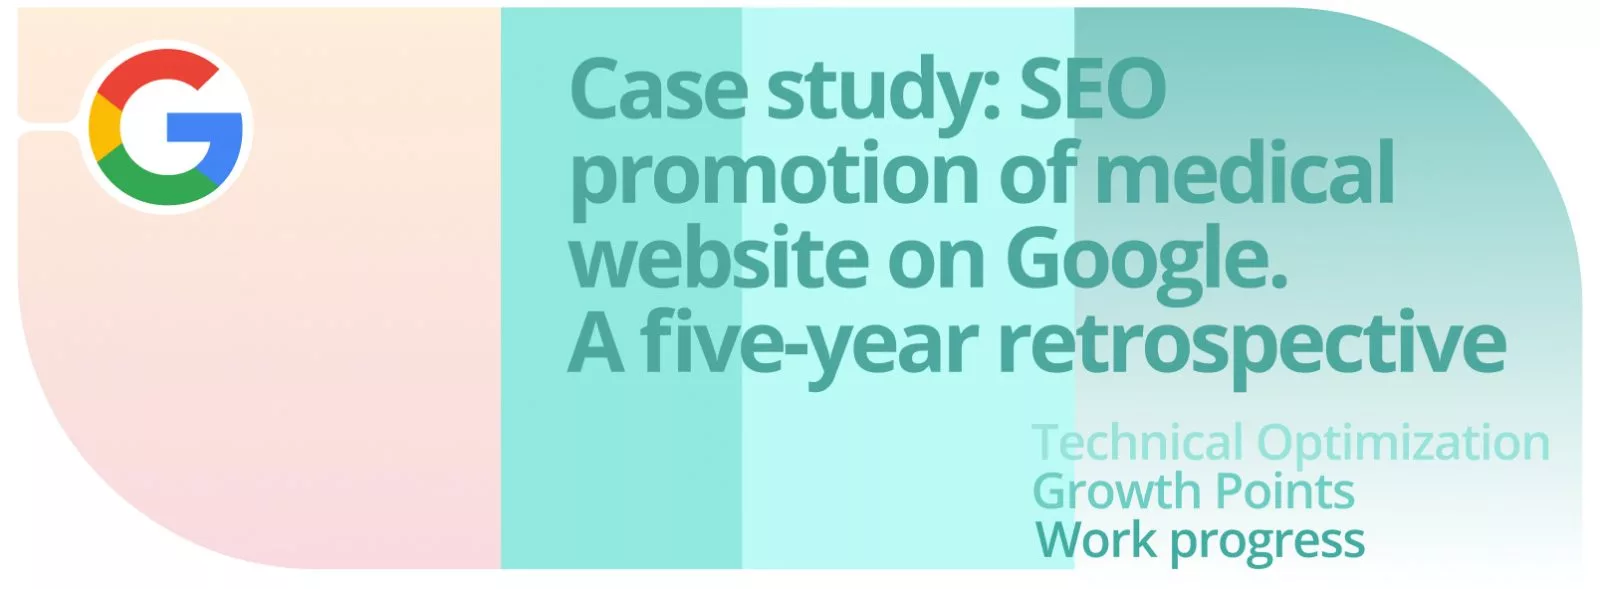 Case study: SEO promotion of medical website on Google. A five-year retrospective